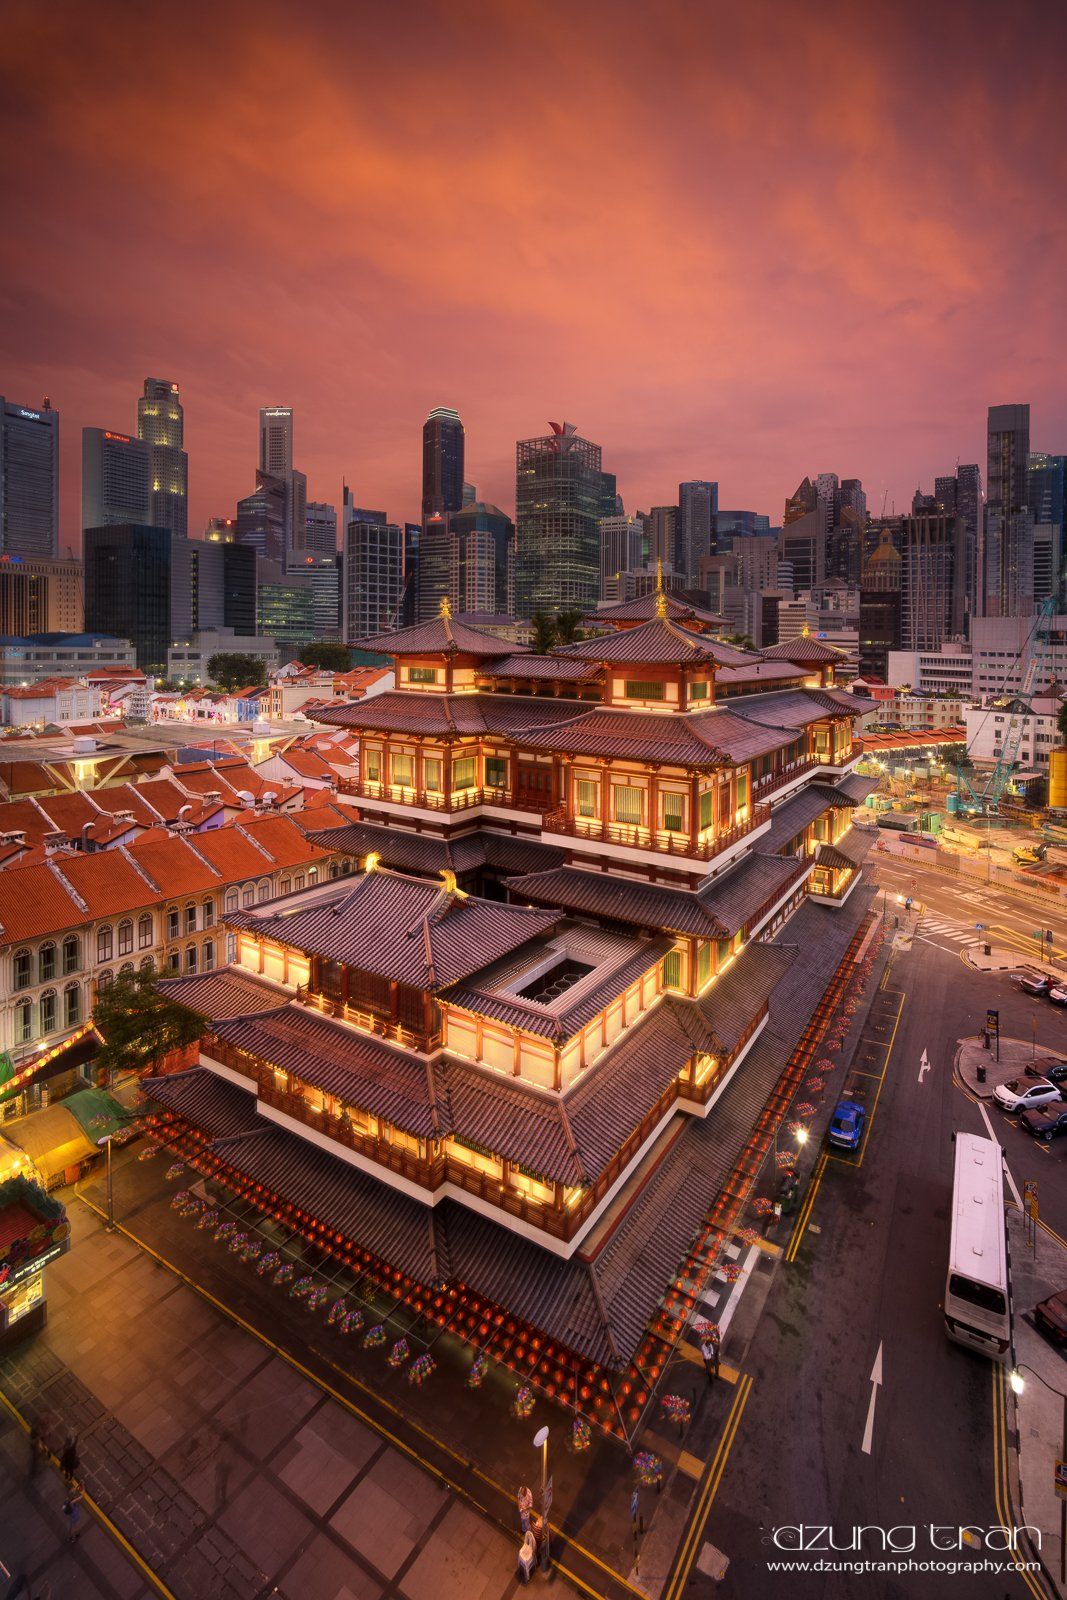 #buddha_tooth_relic_temple #sunset #chinatown #singapore, Tran Minh Dung